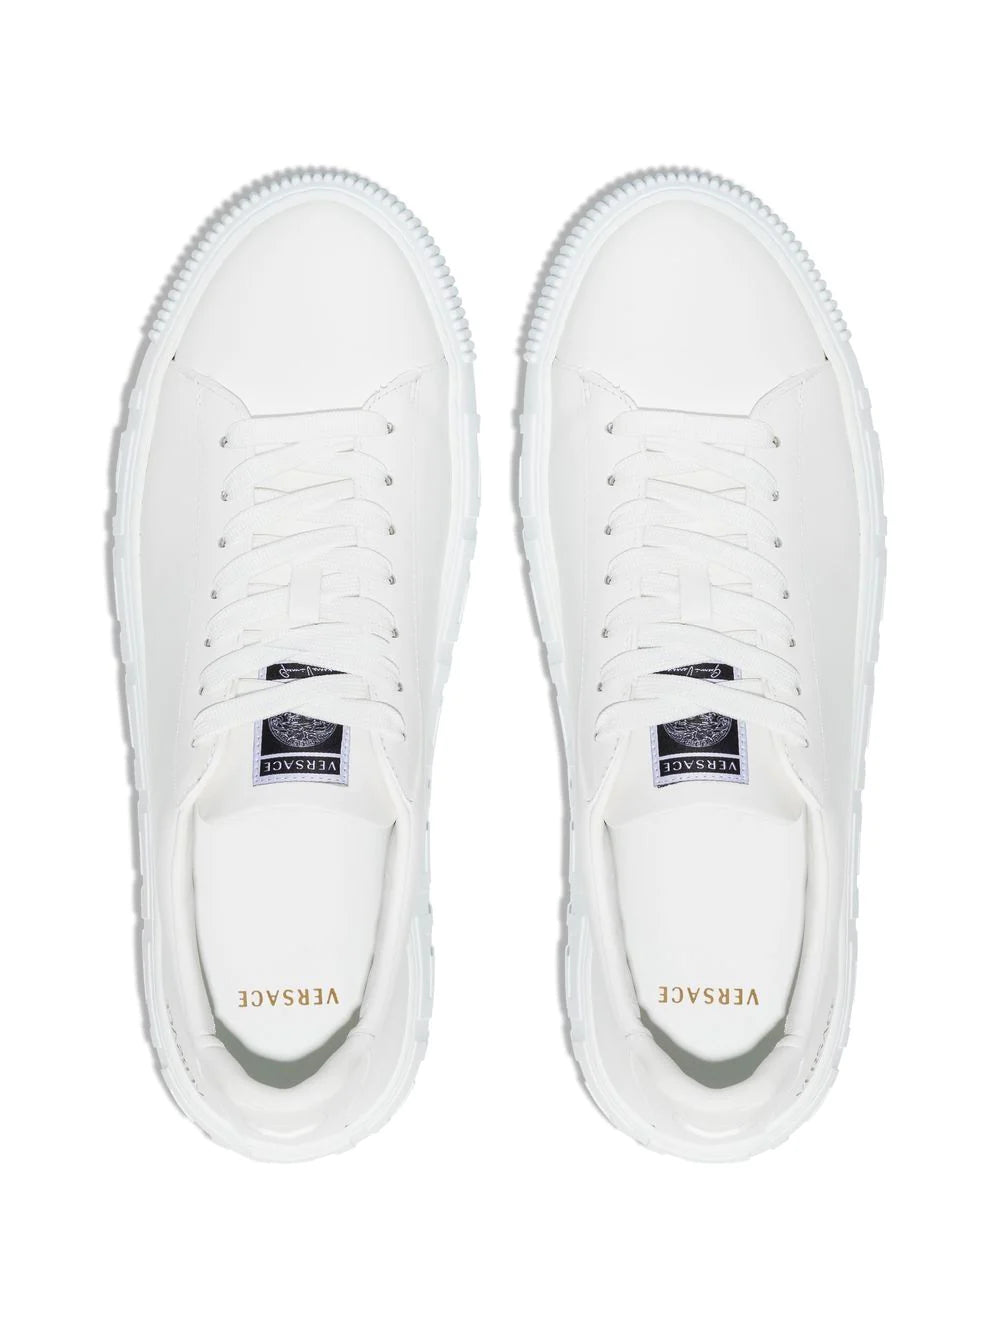 Versace White Greca Lace-up Sneakers